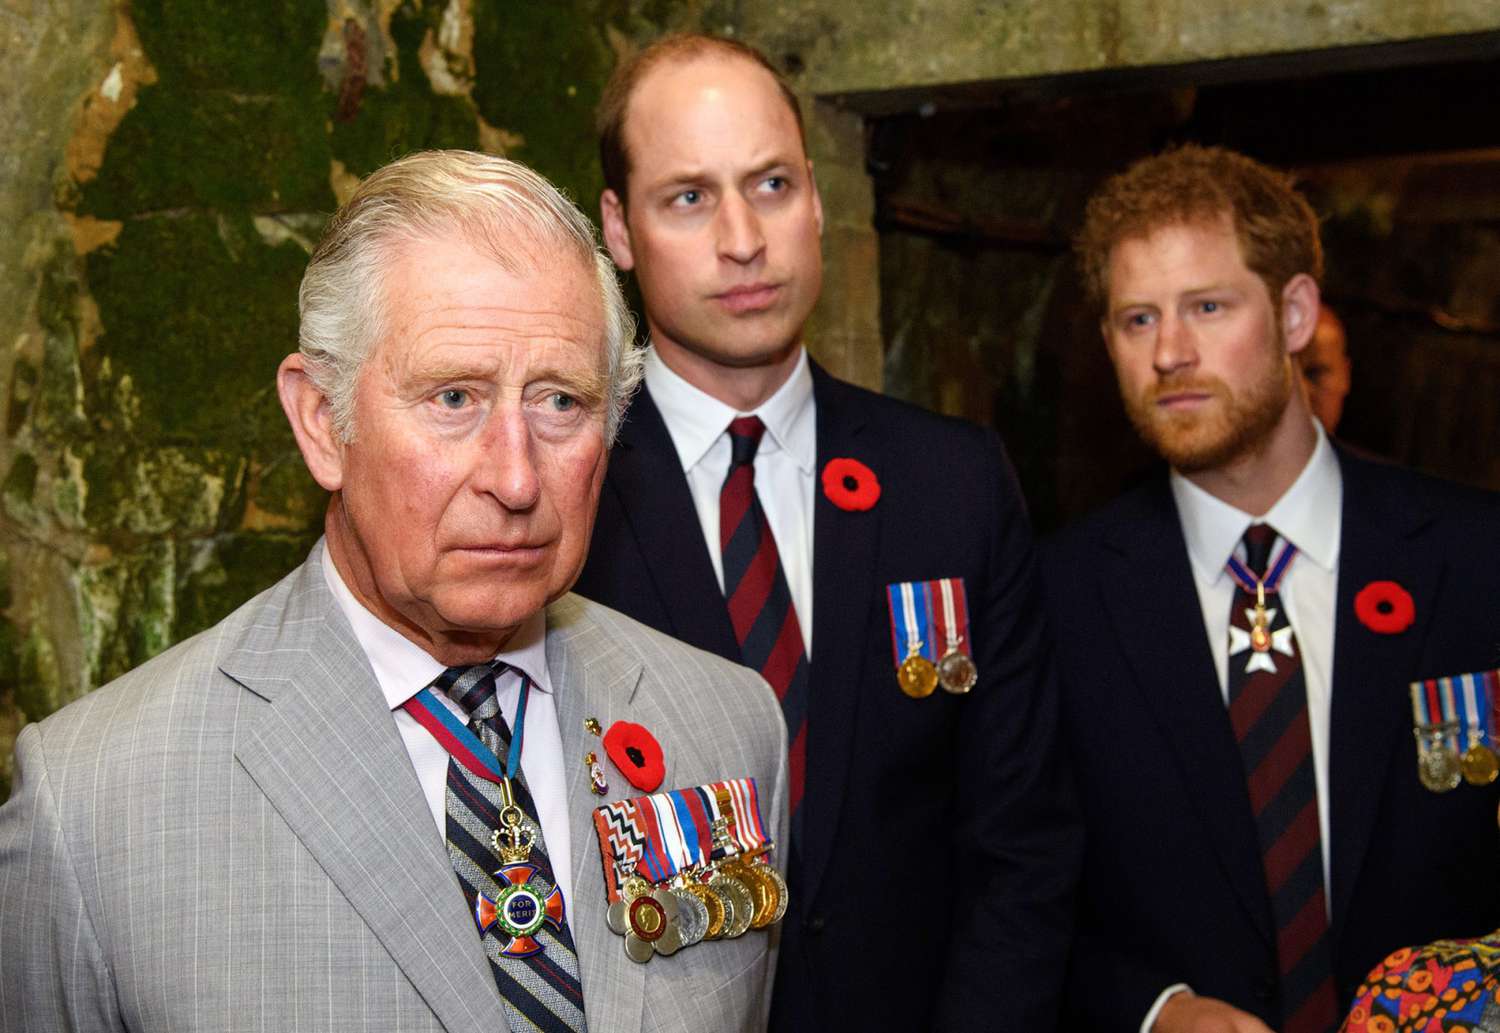 Prince Charles, Prince of Wales, Prince William, Duke of Cambridge and Prince Harry